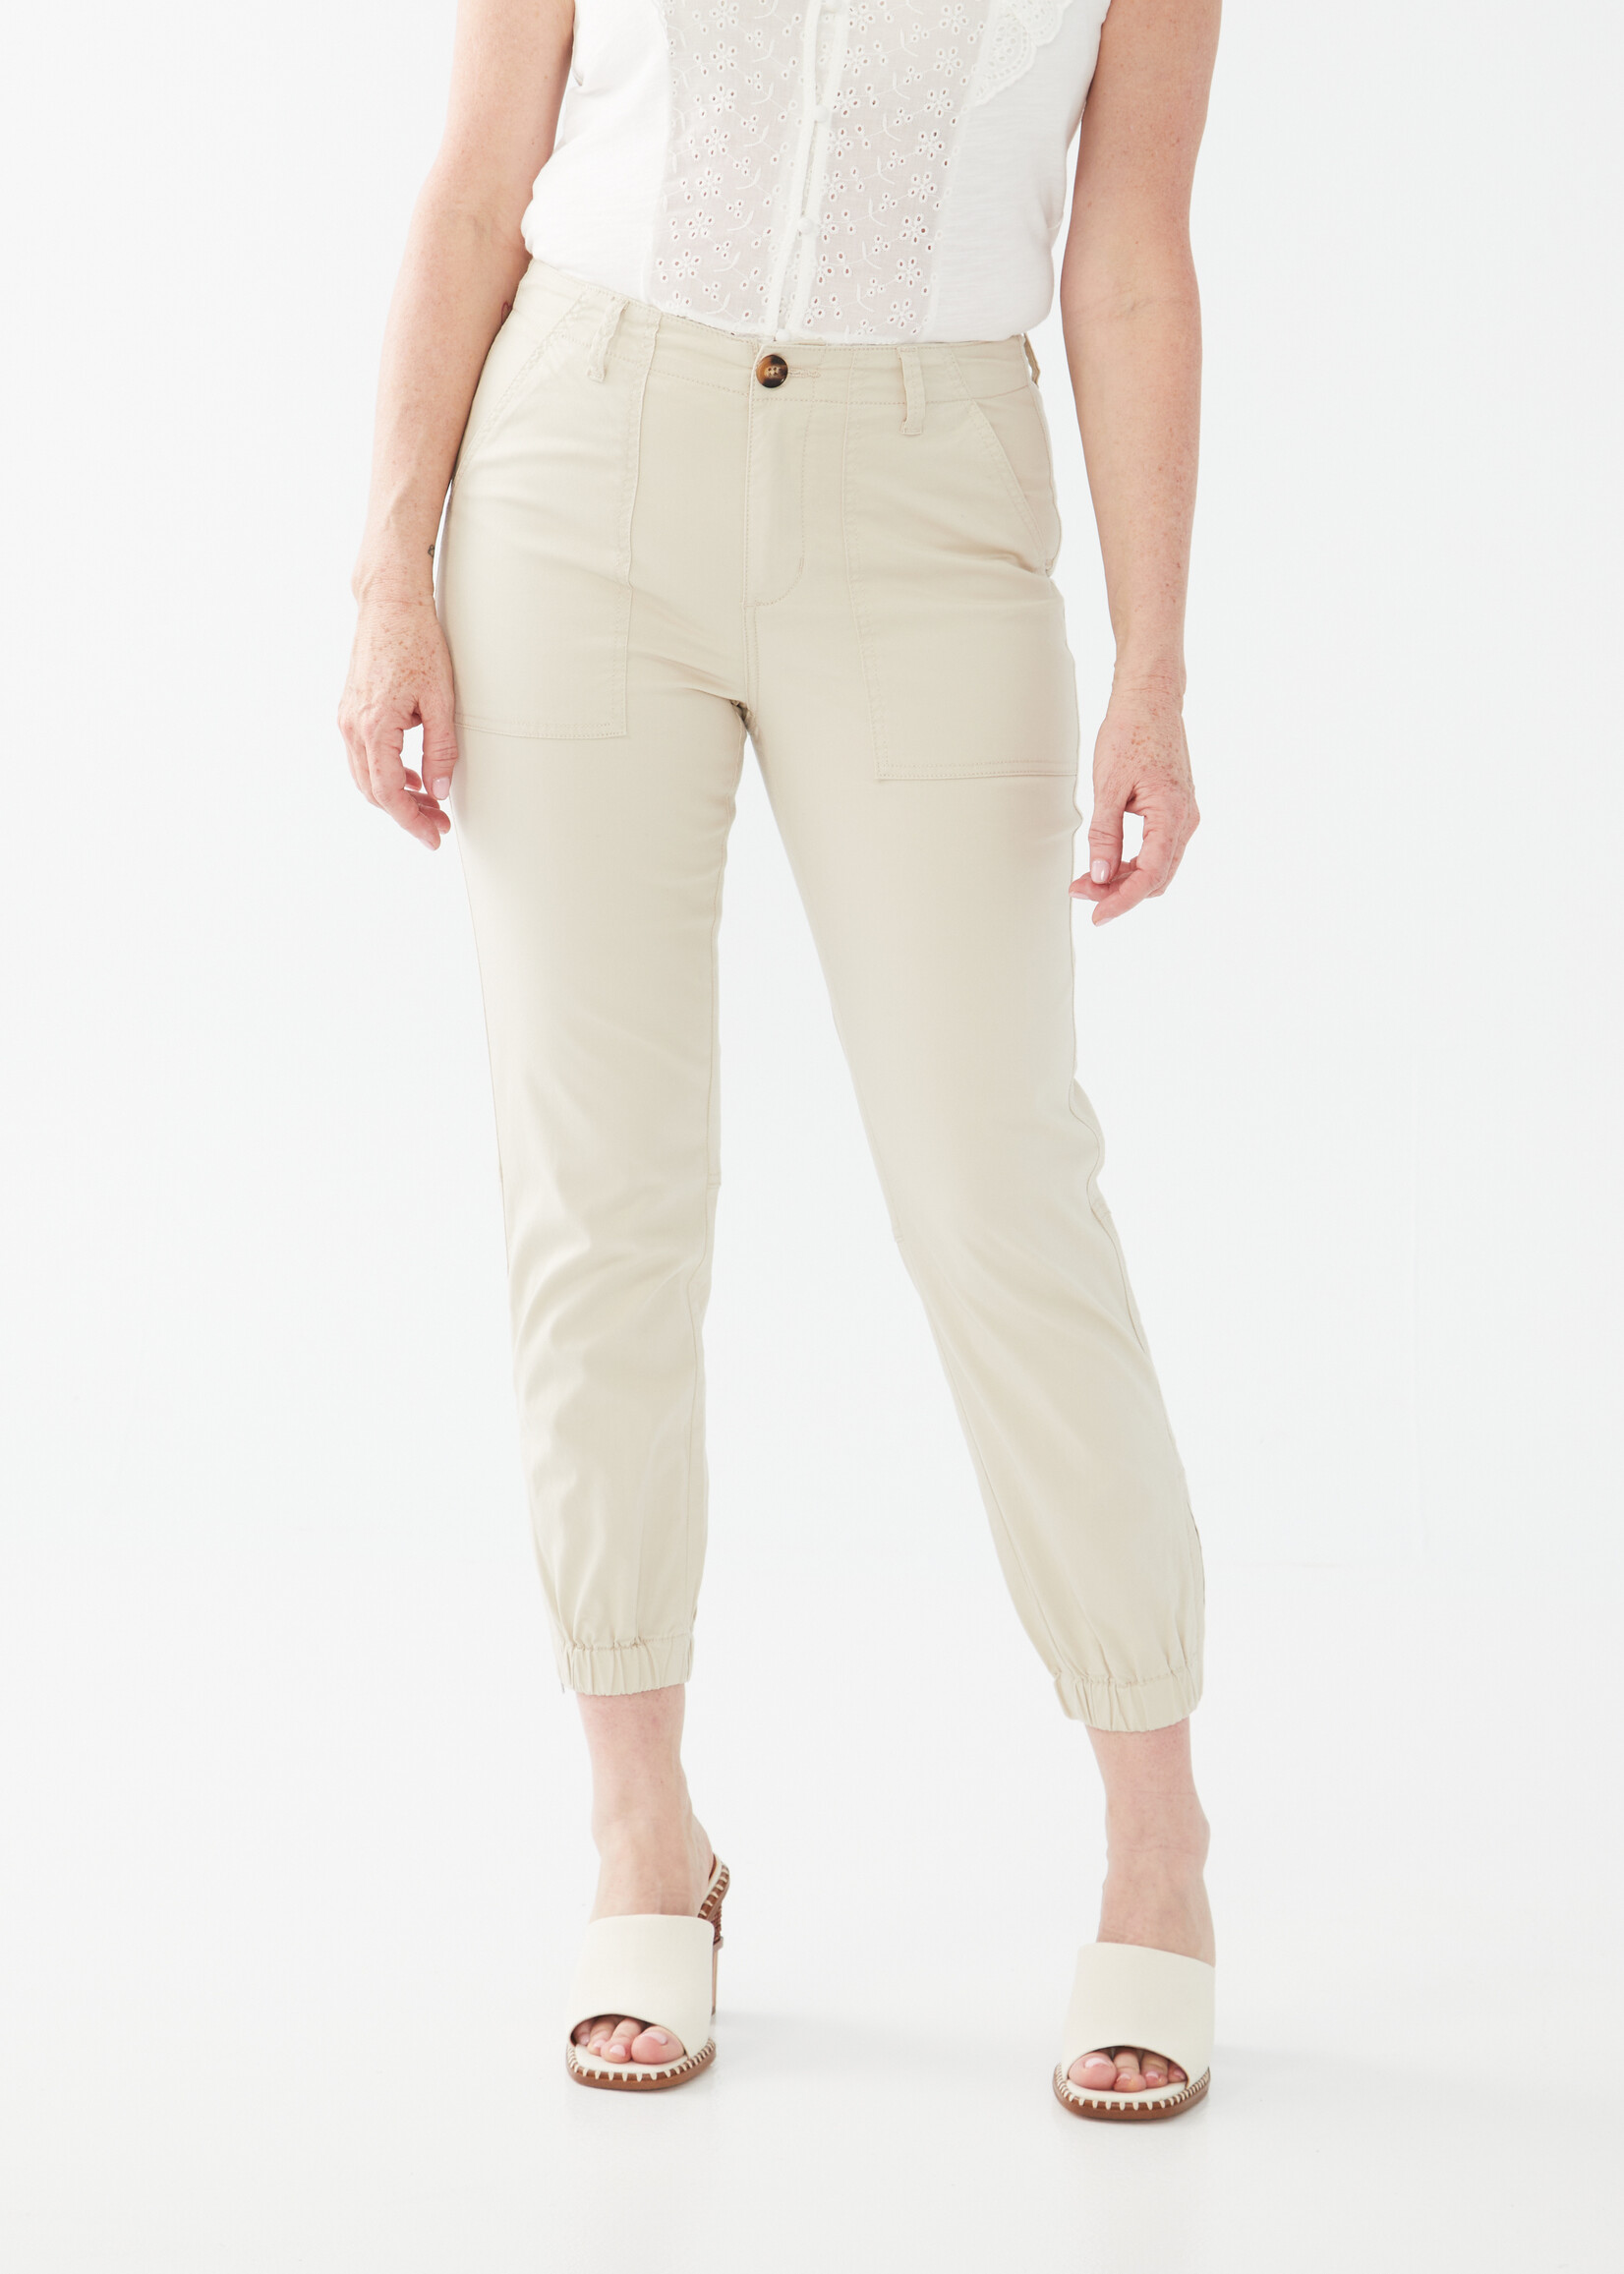 French Dressing Jeans FDJ Cuffed Hem Front Pocket Detail Pant